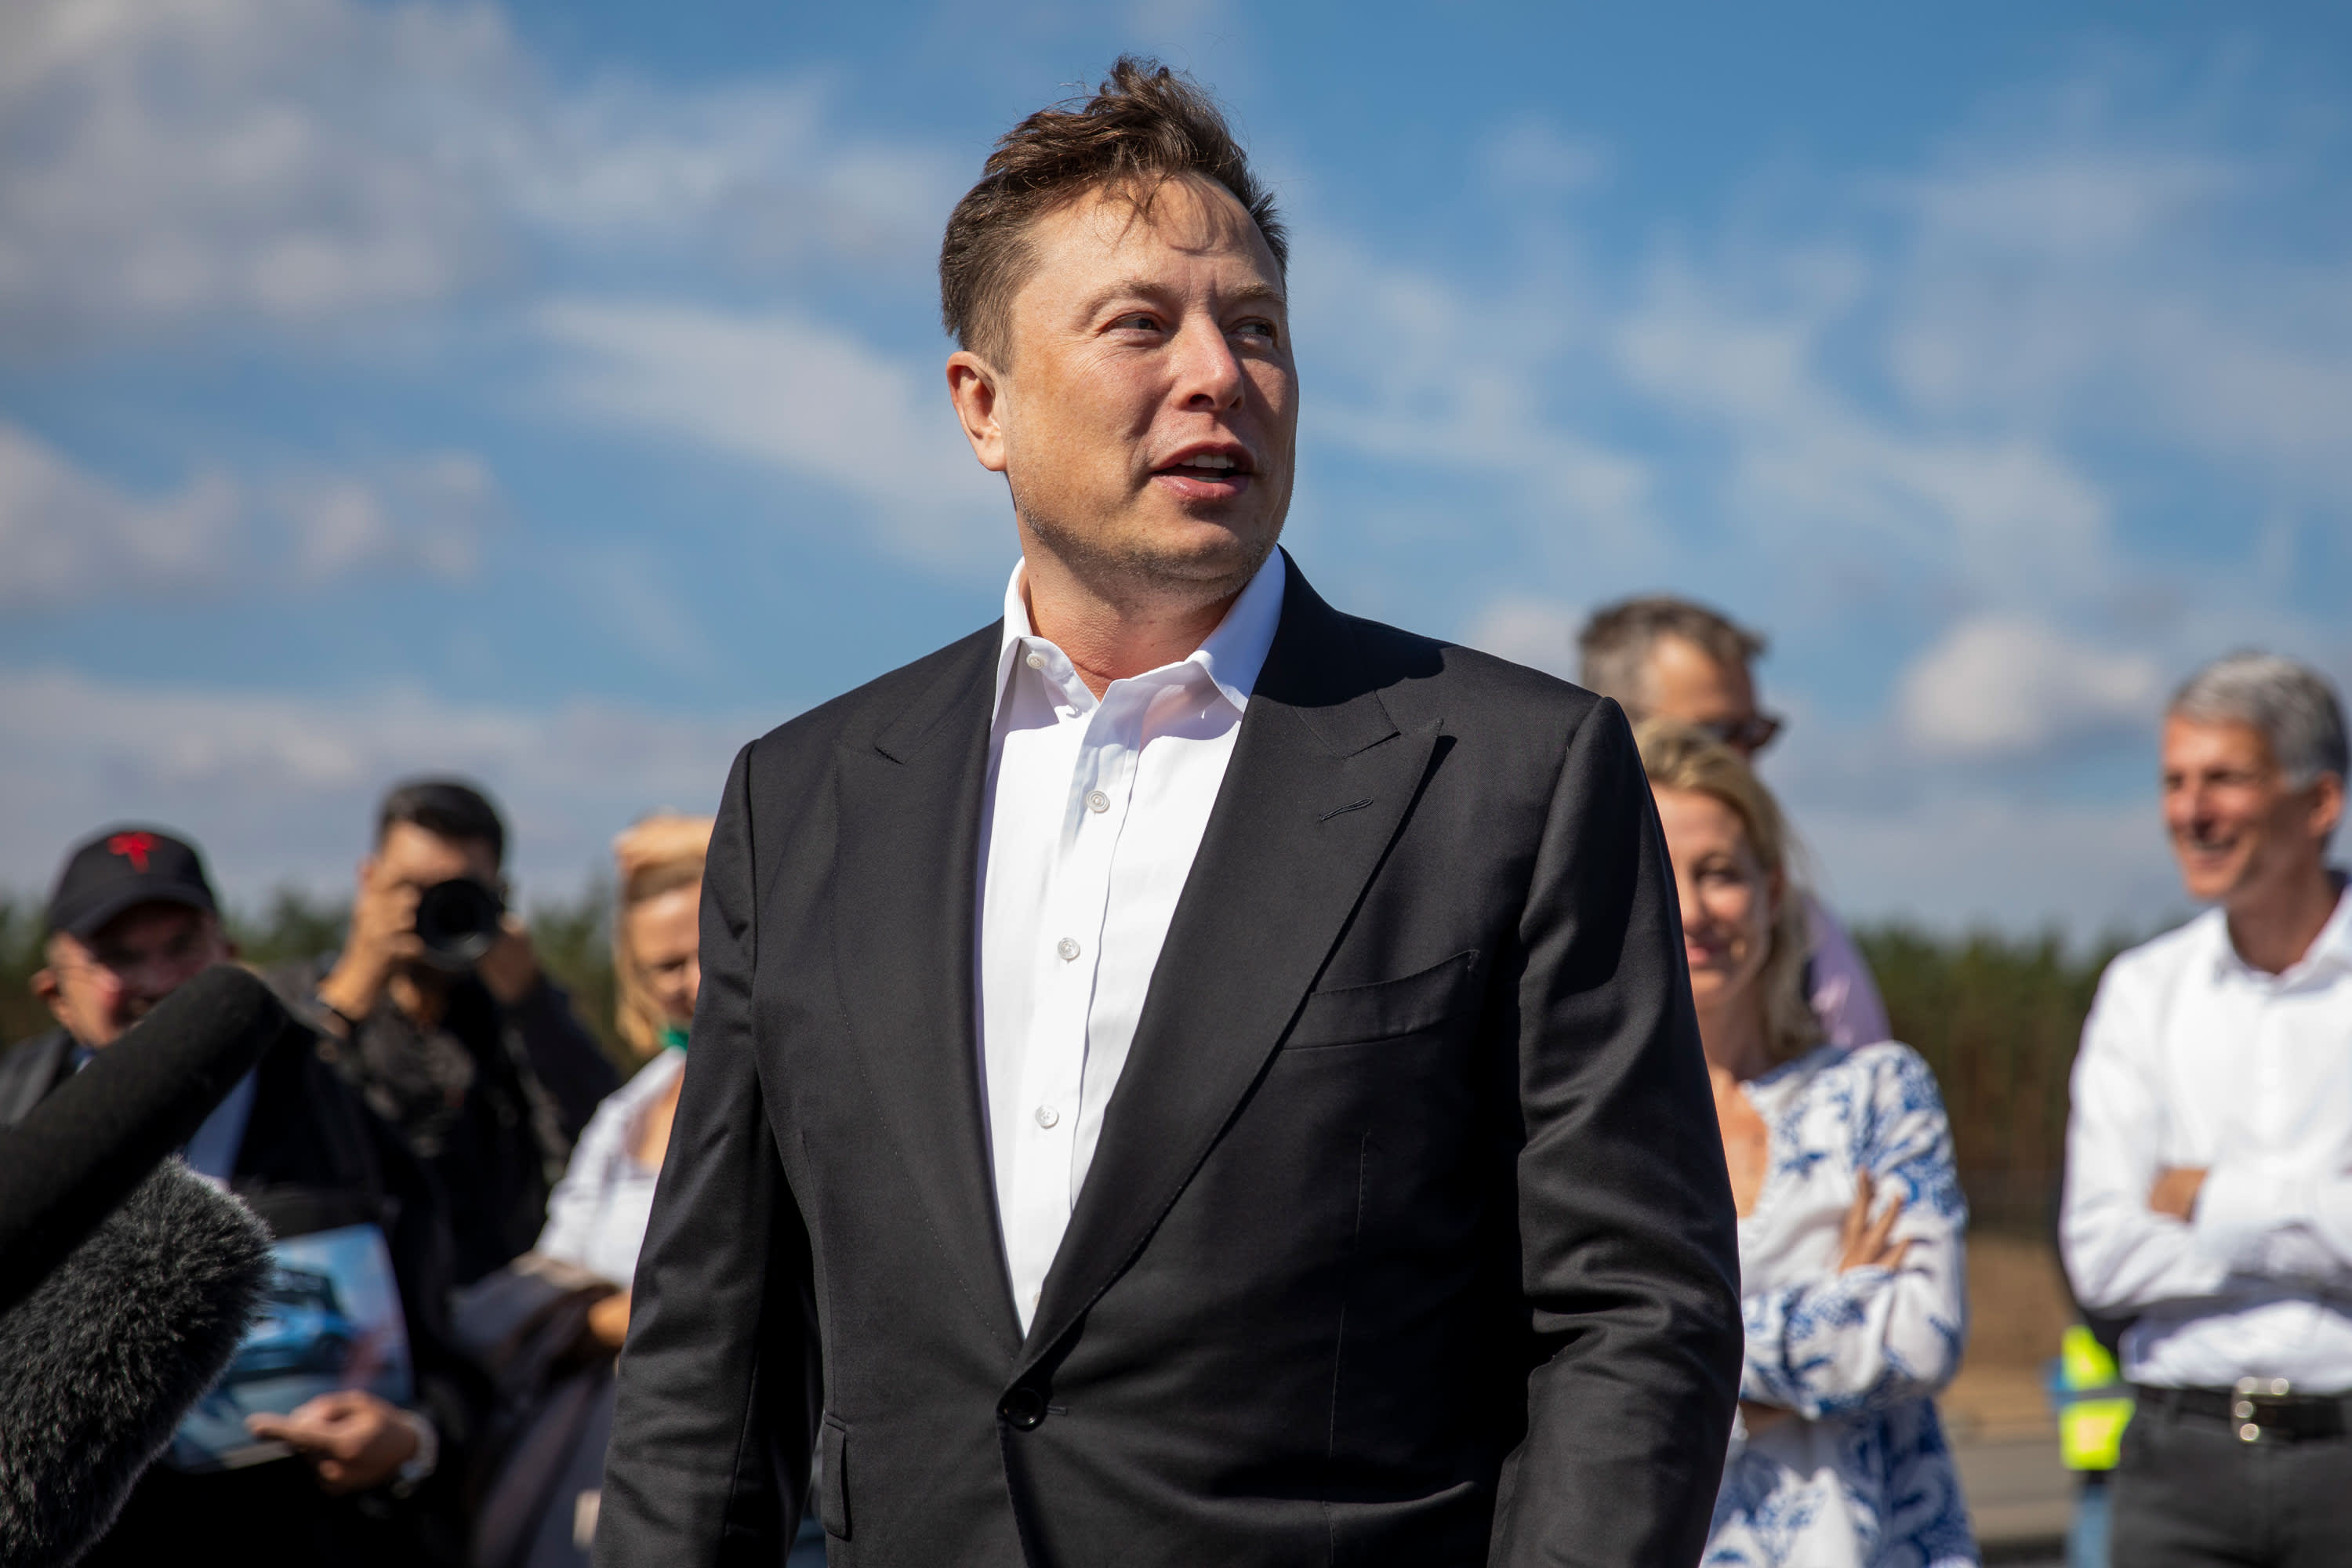 Tesla will pay Ukrainian employees for up to 3 months if they are conscripted to fight